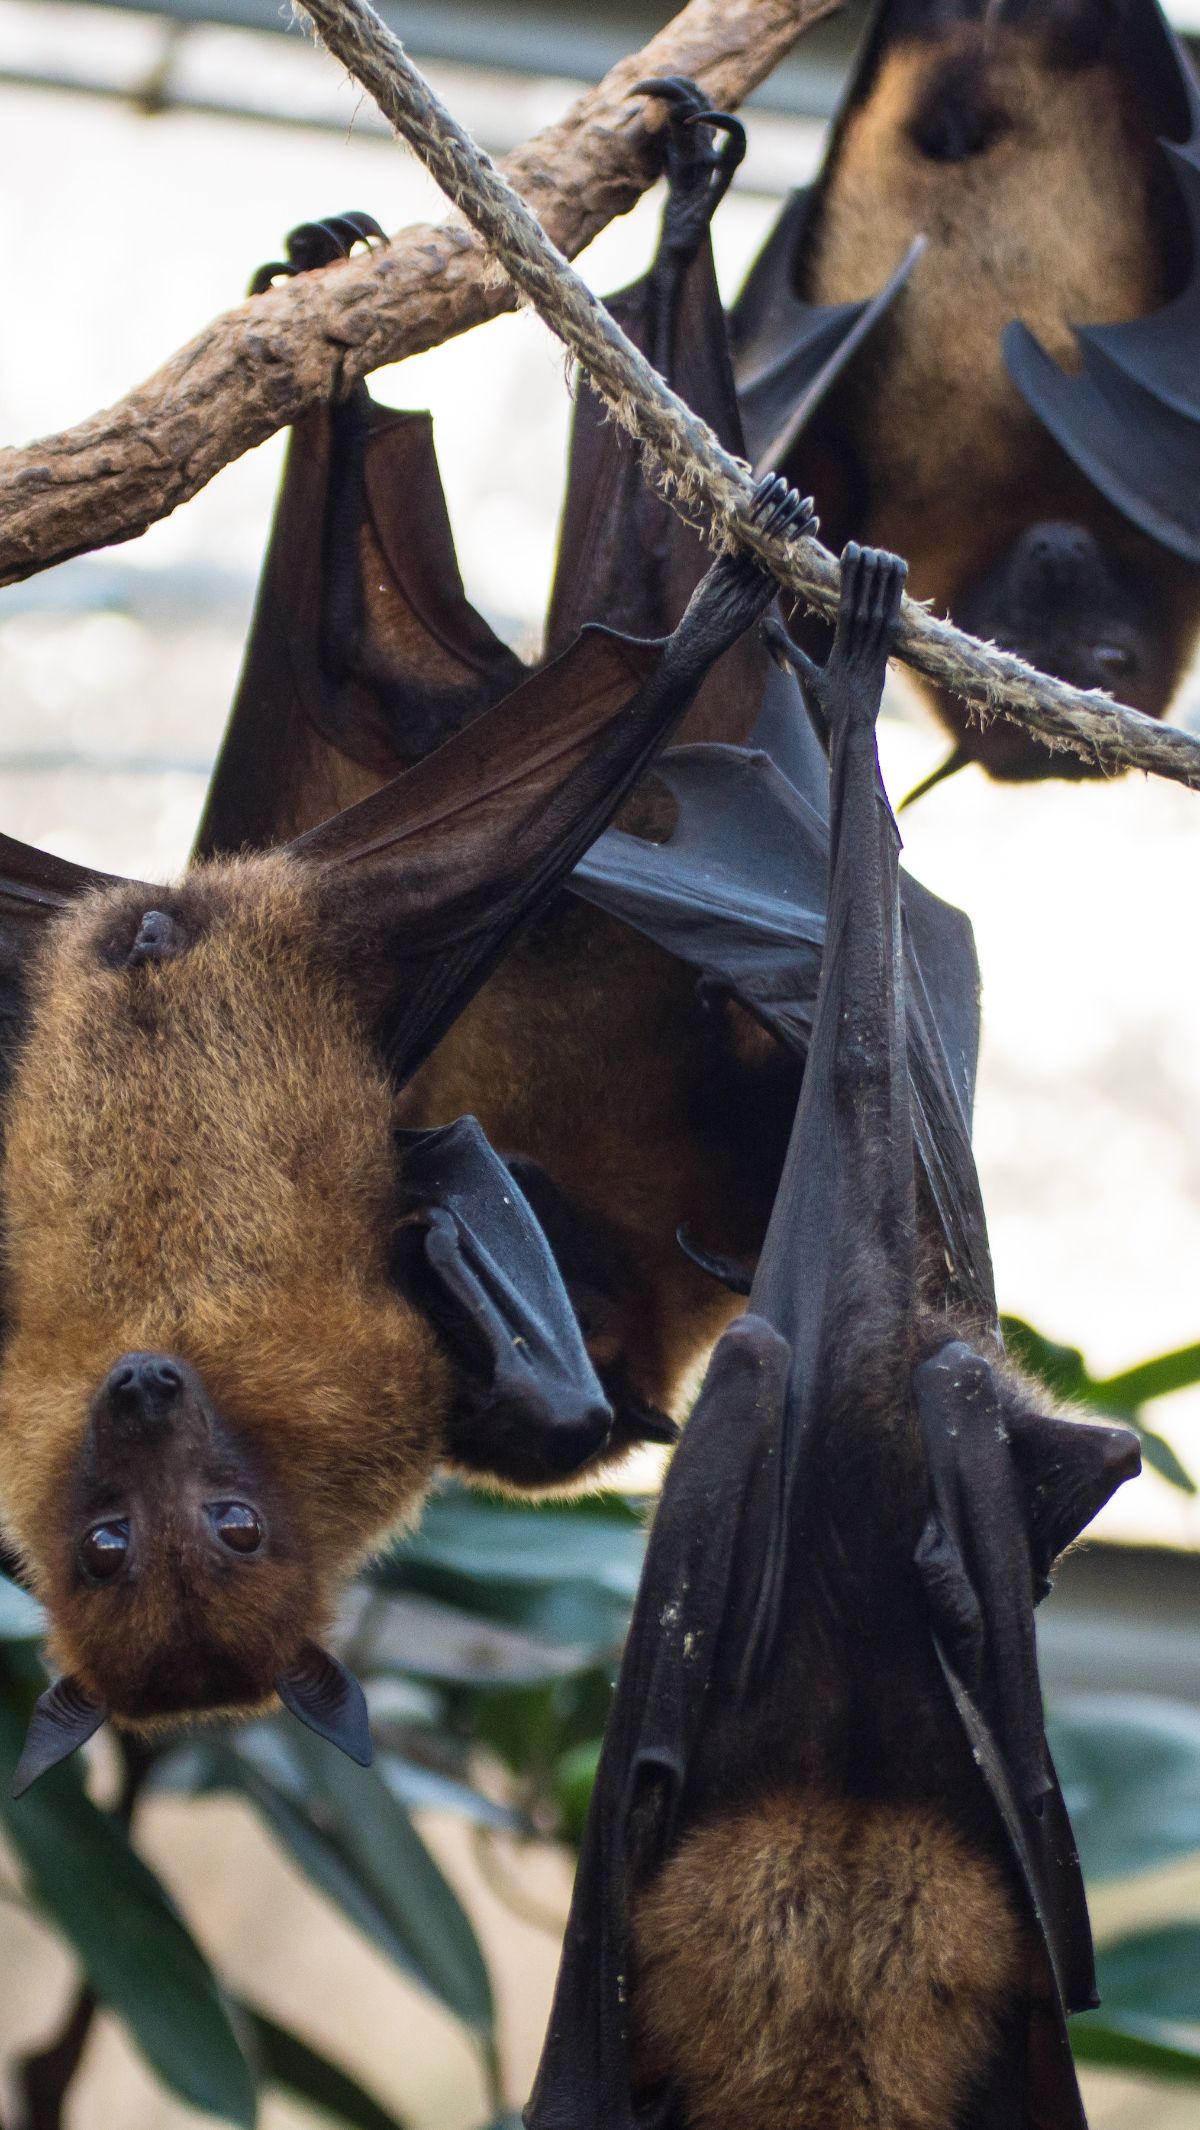 1. Vampire Bat: The Classic Blood-Seeker<div><br></div><div> Among the most famous blood-consuming animals, the vampire bat stands out. These animals, indeed, feed on blood, usually from livestock. With their hidden strategy and blood-slurping behavior. Vampire bats have firmed their status as icons of vampire-like in the animal kingdom.<div><br></div><div>Photo: unsplash/Johannes Giez</div></div>